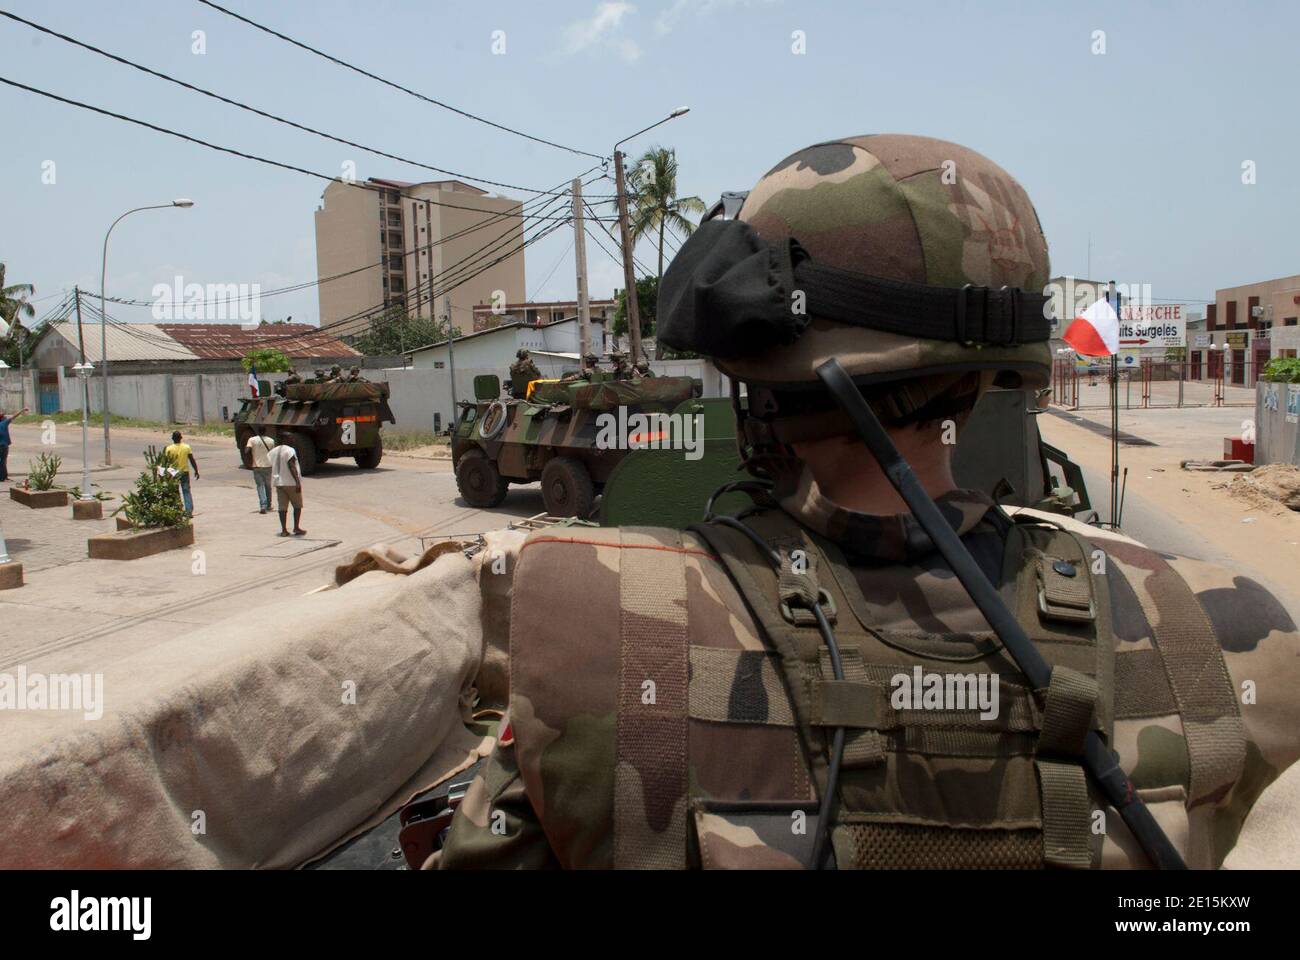 French troops patrolling with armored vehicles (VAB) in a street of Abidjan, Ivory Coast on April 2, 2011. France has also boosted its UN Licorne (Unicorn) mission in the cocoa-rich nation by 300 to around 1,400 troops, where part of their mission is to protect foreigners from attacks and looting amid rising insecurity. Photo by SCH Blanchet/ECPAD/ABACAPRESS.COM Stock Photo